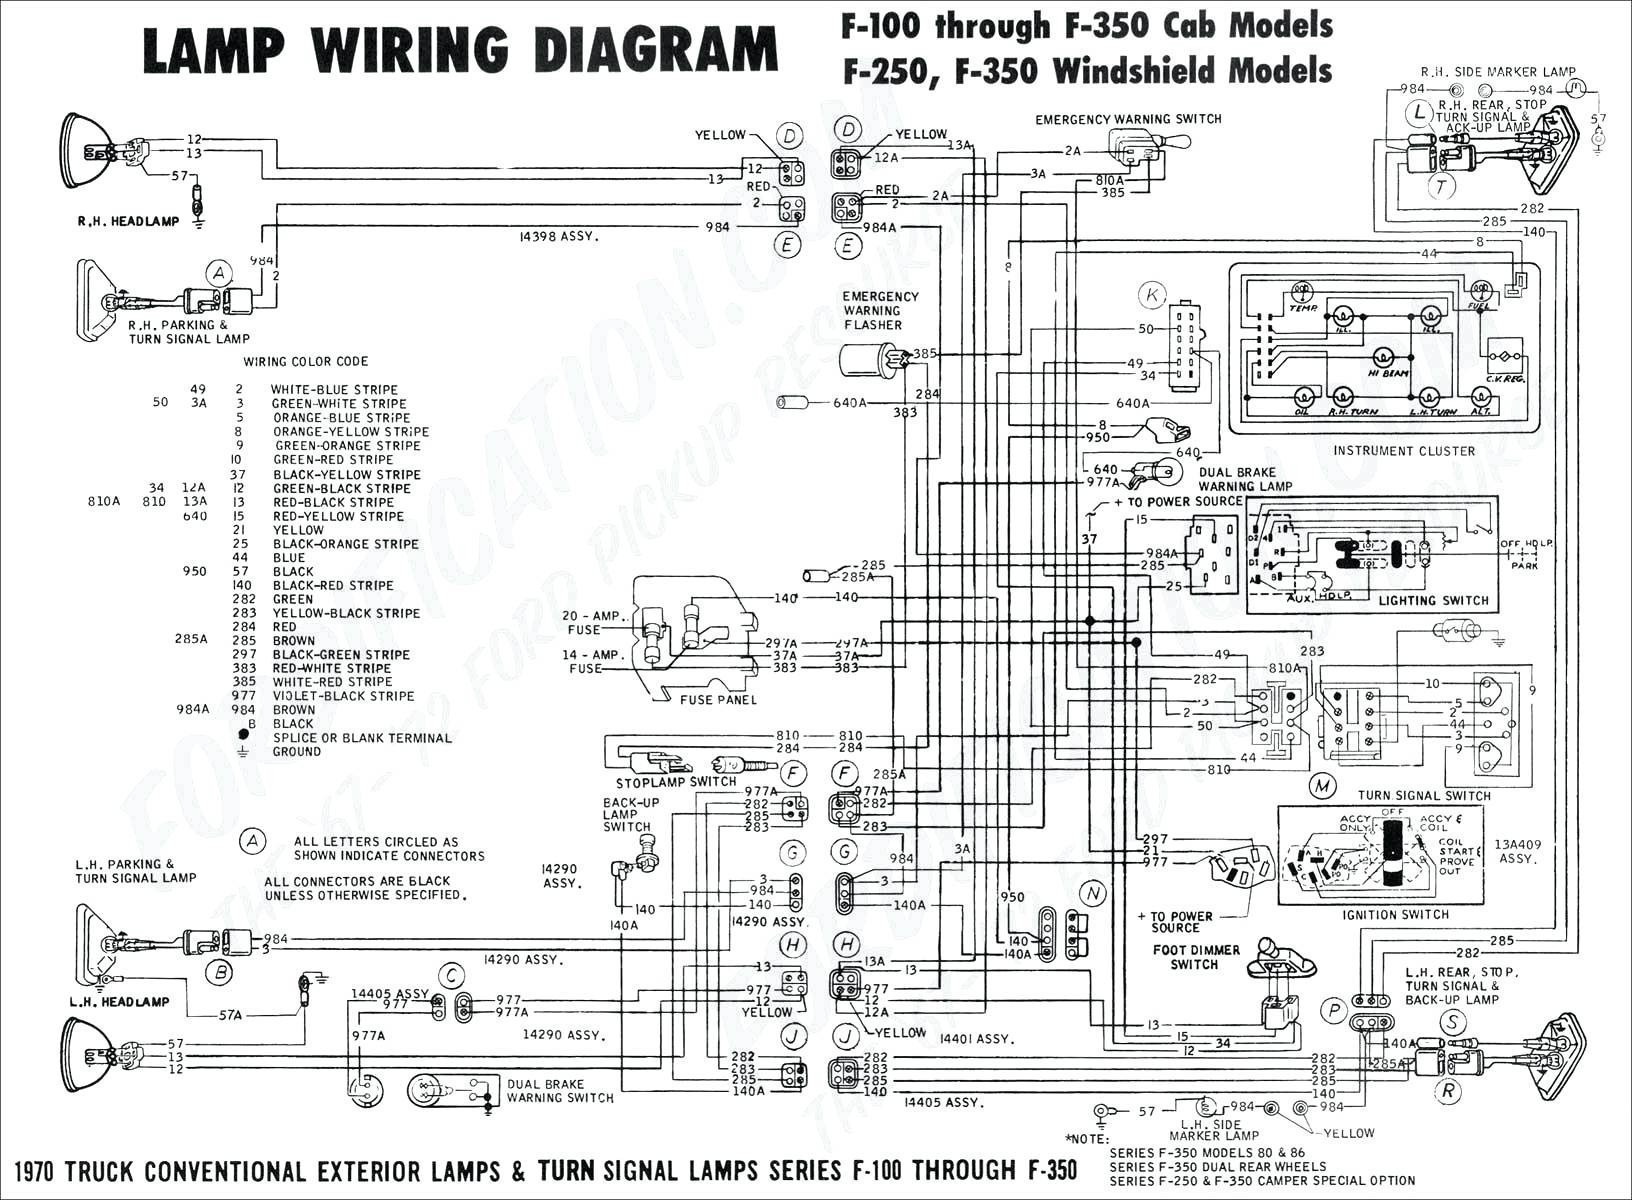 Wiring Diagram for 5th Wheel Trailer New Wiring Diagram Rv & Household Electrical Wiring Diagram